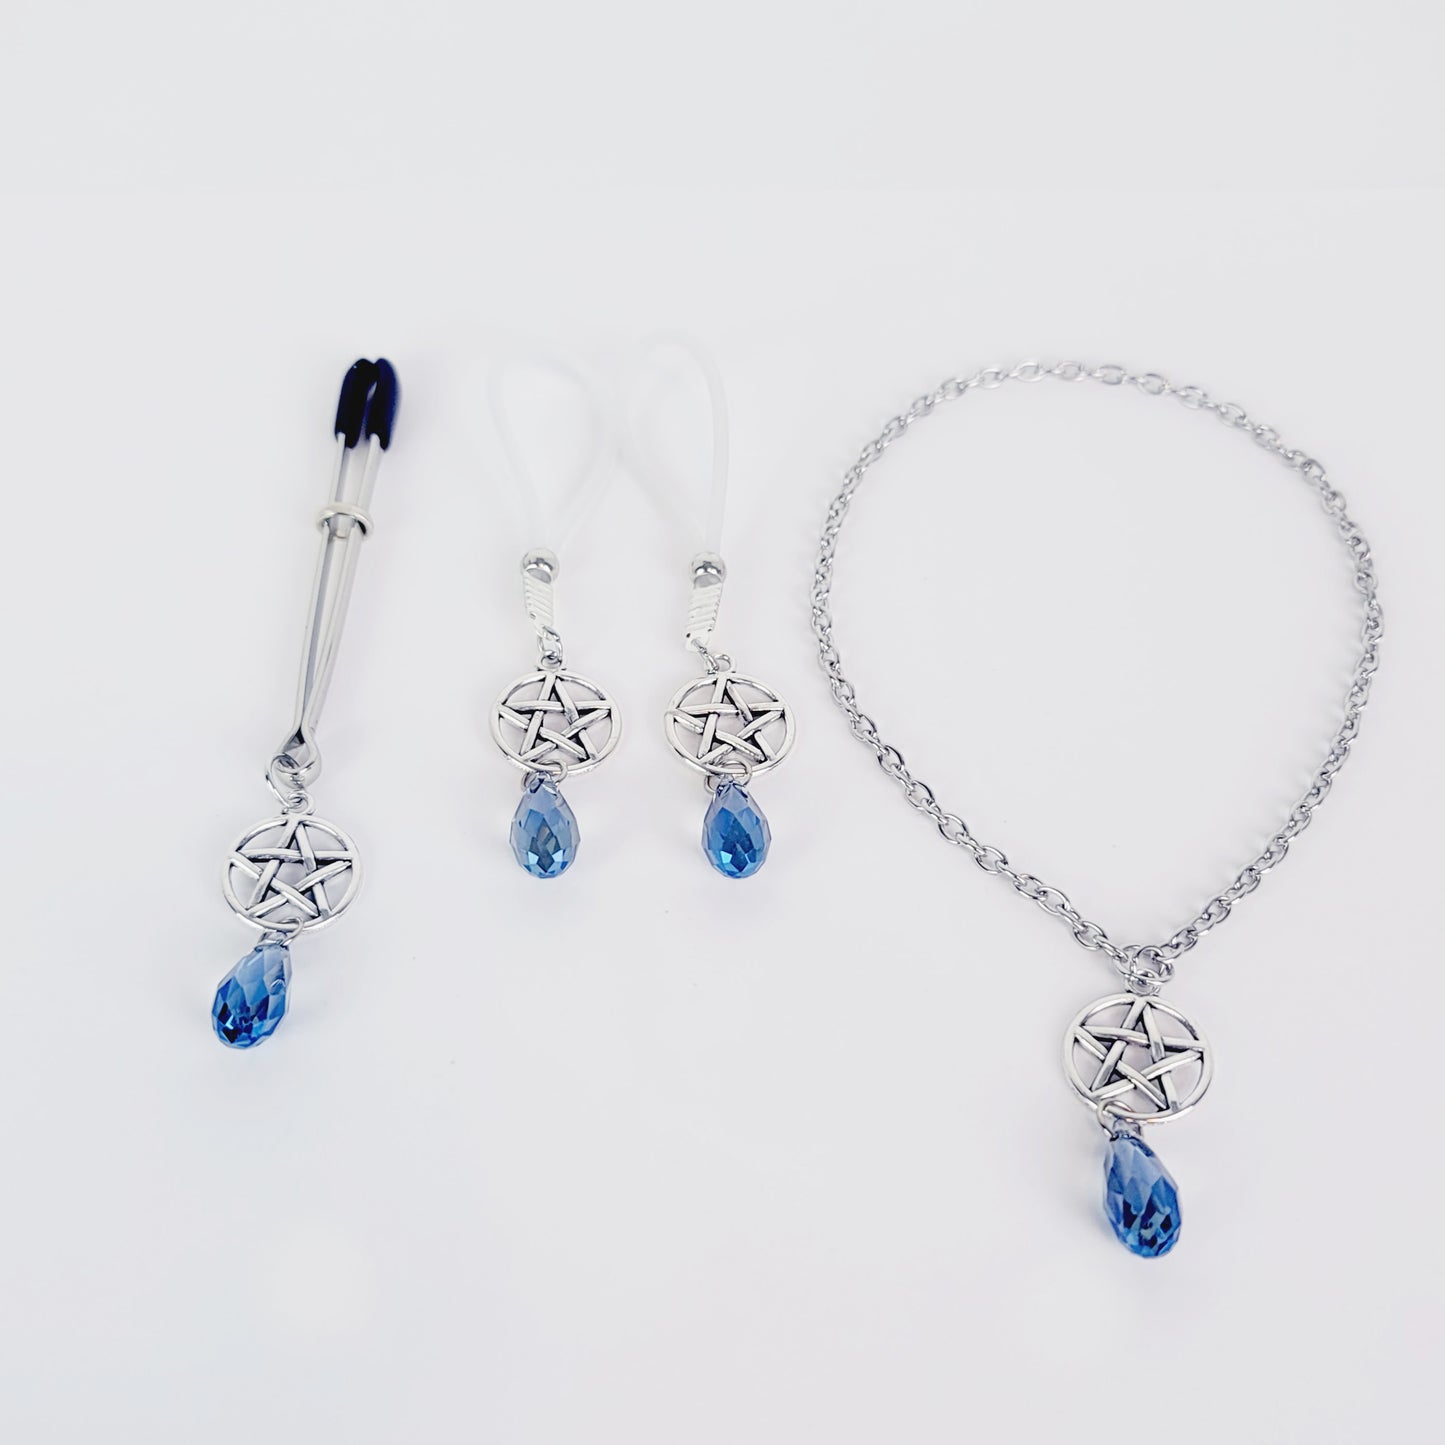 Intimate Jewelry Set For Couples with Pentagram and Crystal. Penis Chain Noose, Tweezer Clit Clamp, and Nipple Dangles or Clamps.